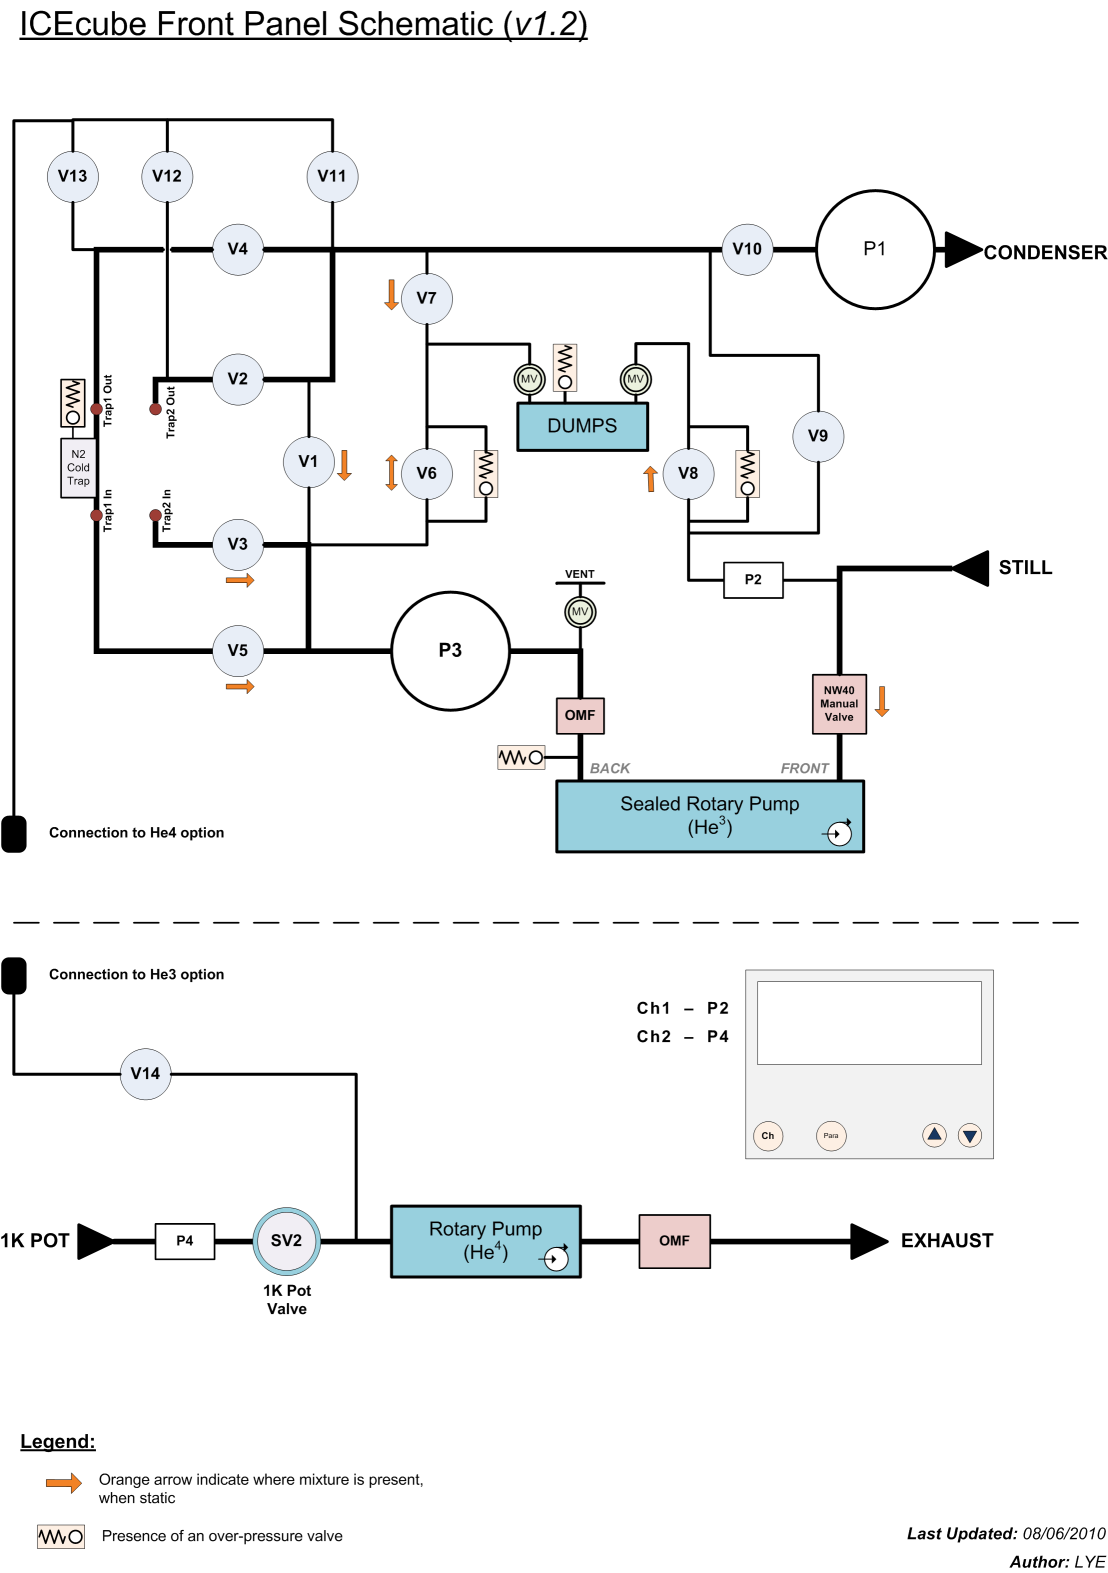 ICEcube_front_panel_schematic_v1-2.png